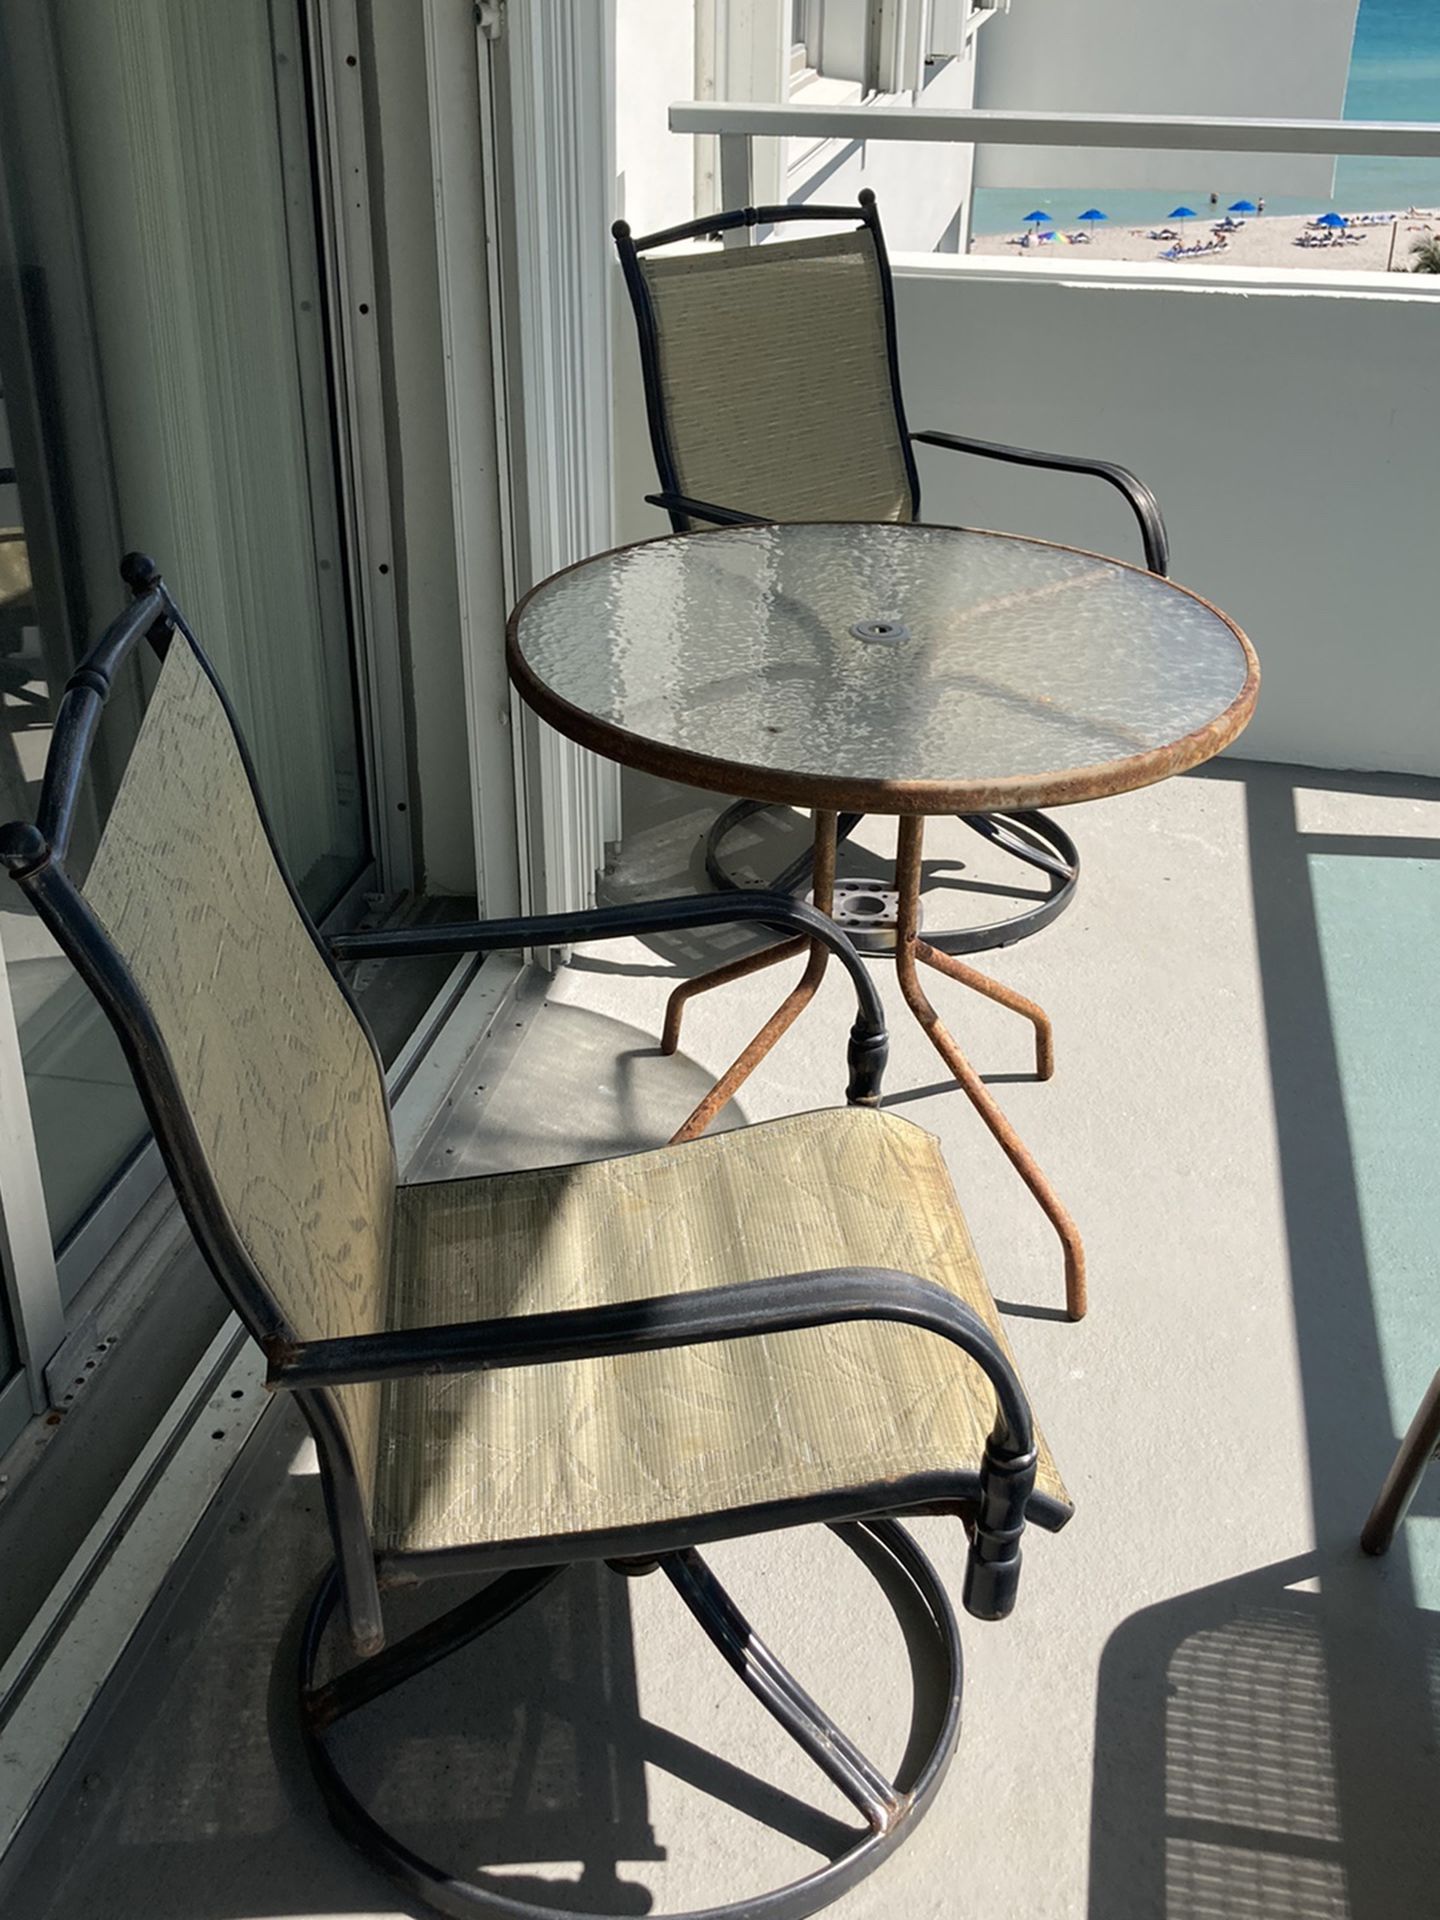 Free Table And chairs